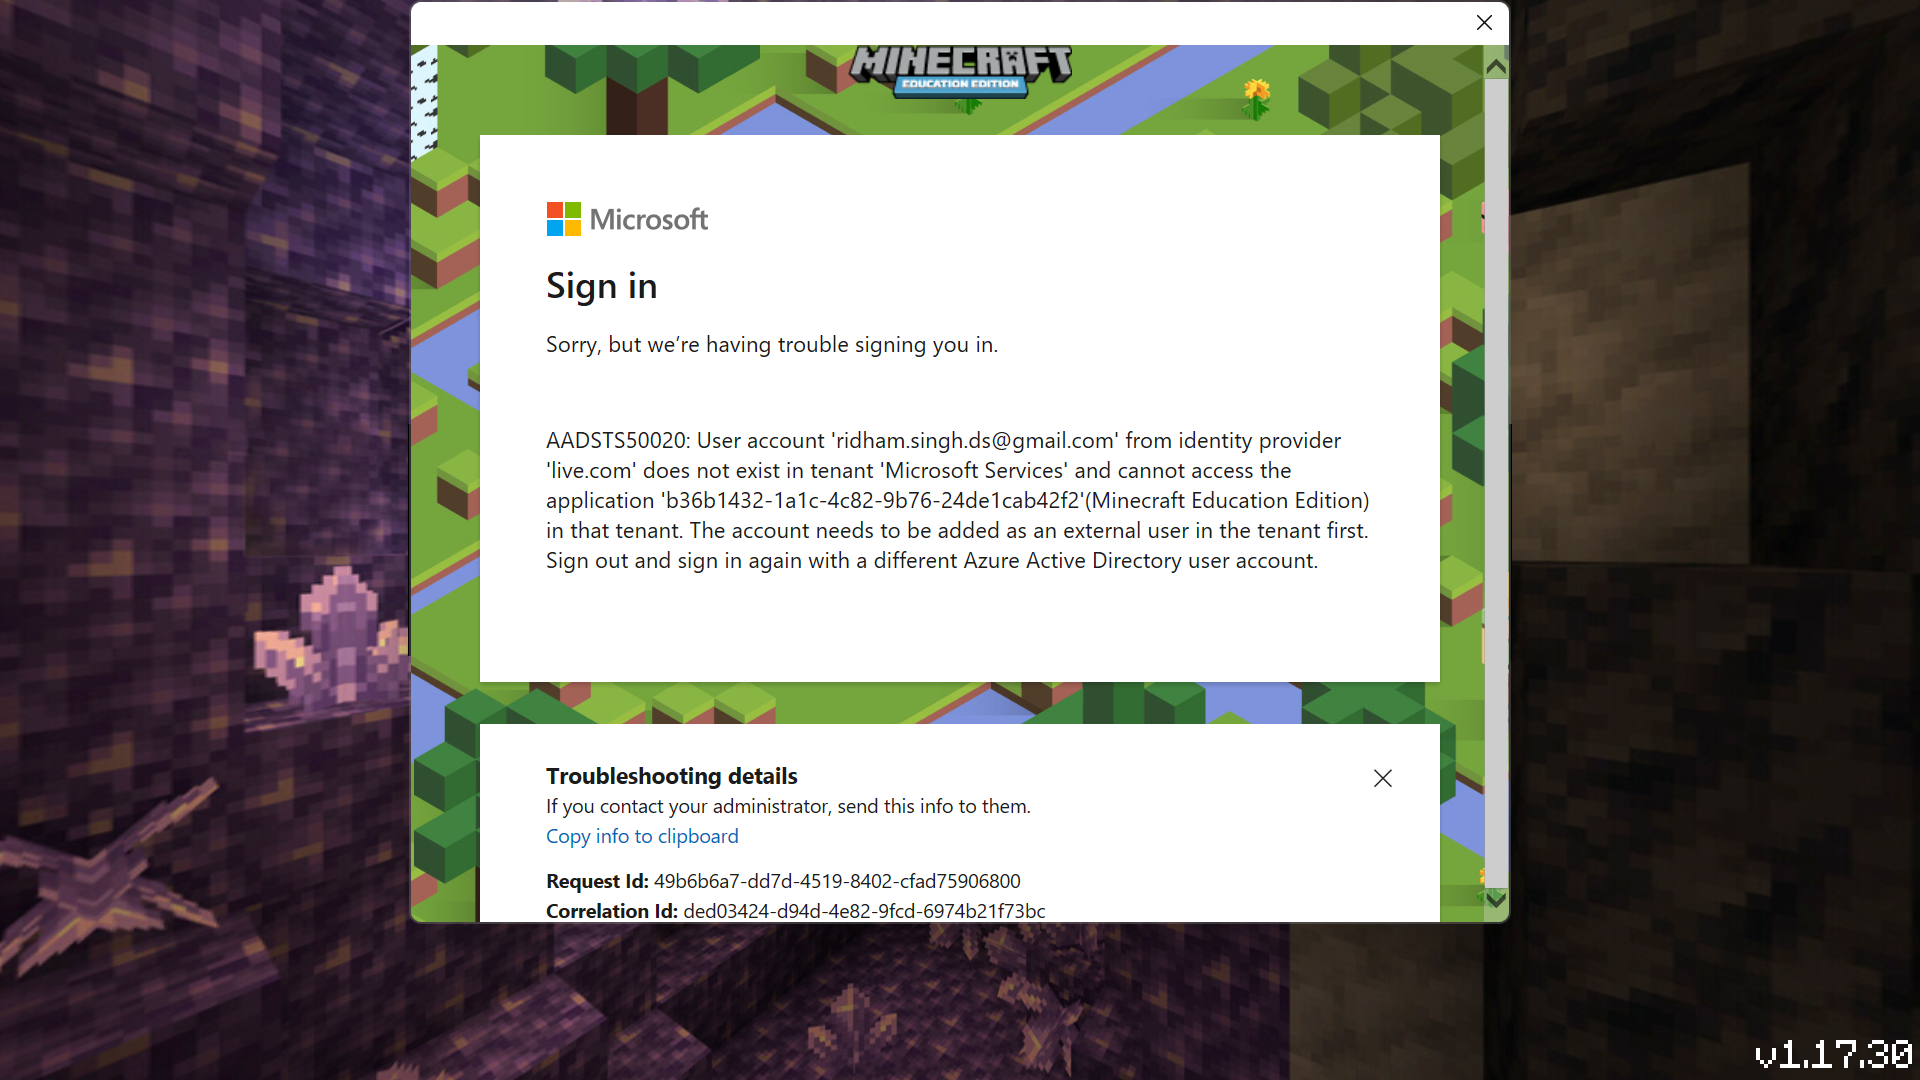 Can't log into minecraft account. Please help if possible.